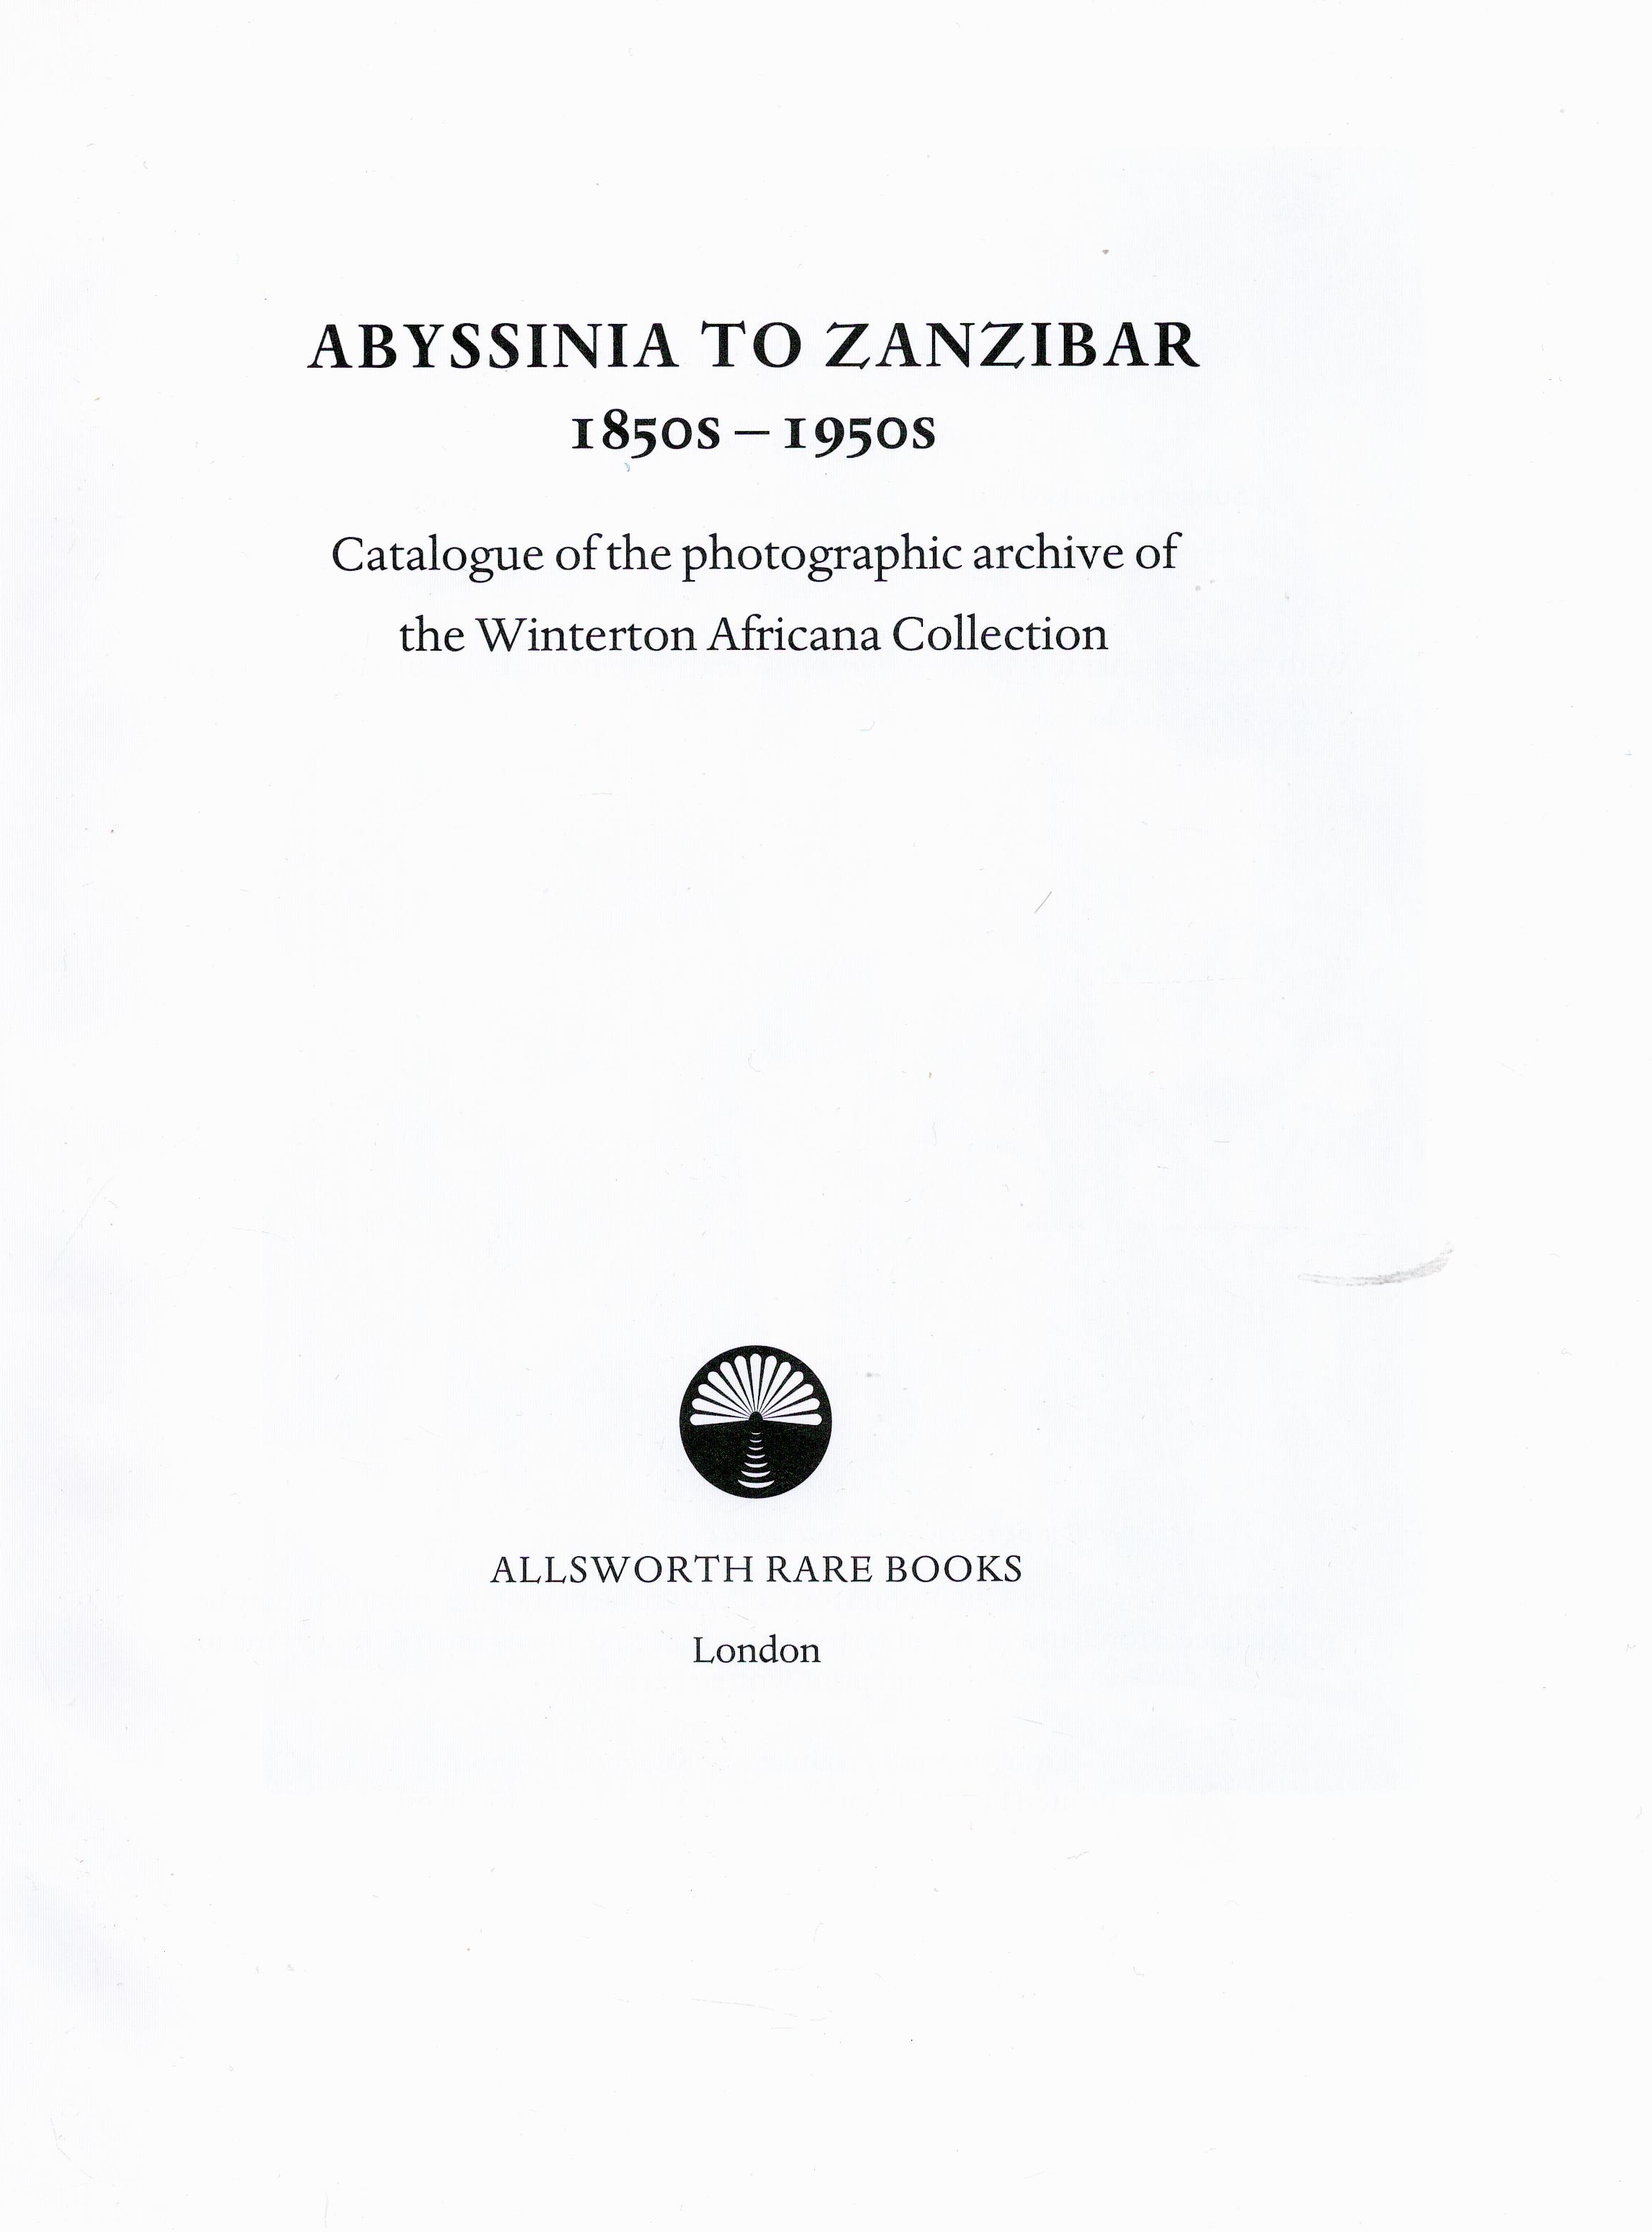 Abyssinia to Zanzibar 1850s 1950s Catalogue of the photographic archive of the Winterton Africana - Image 2 of 3